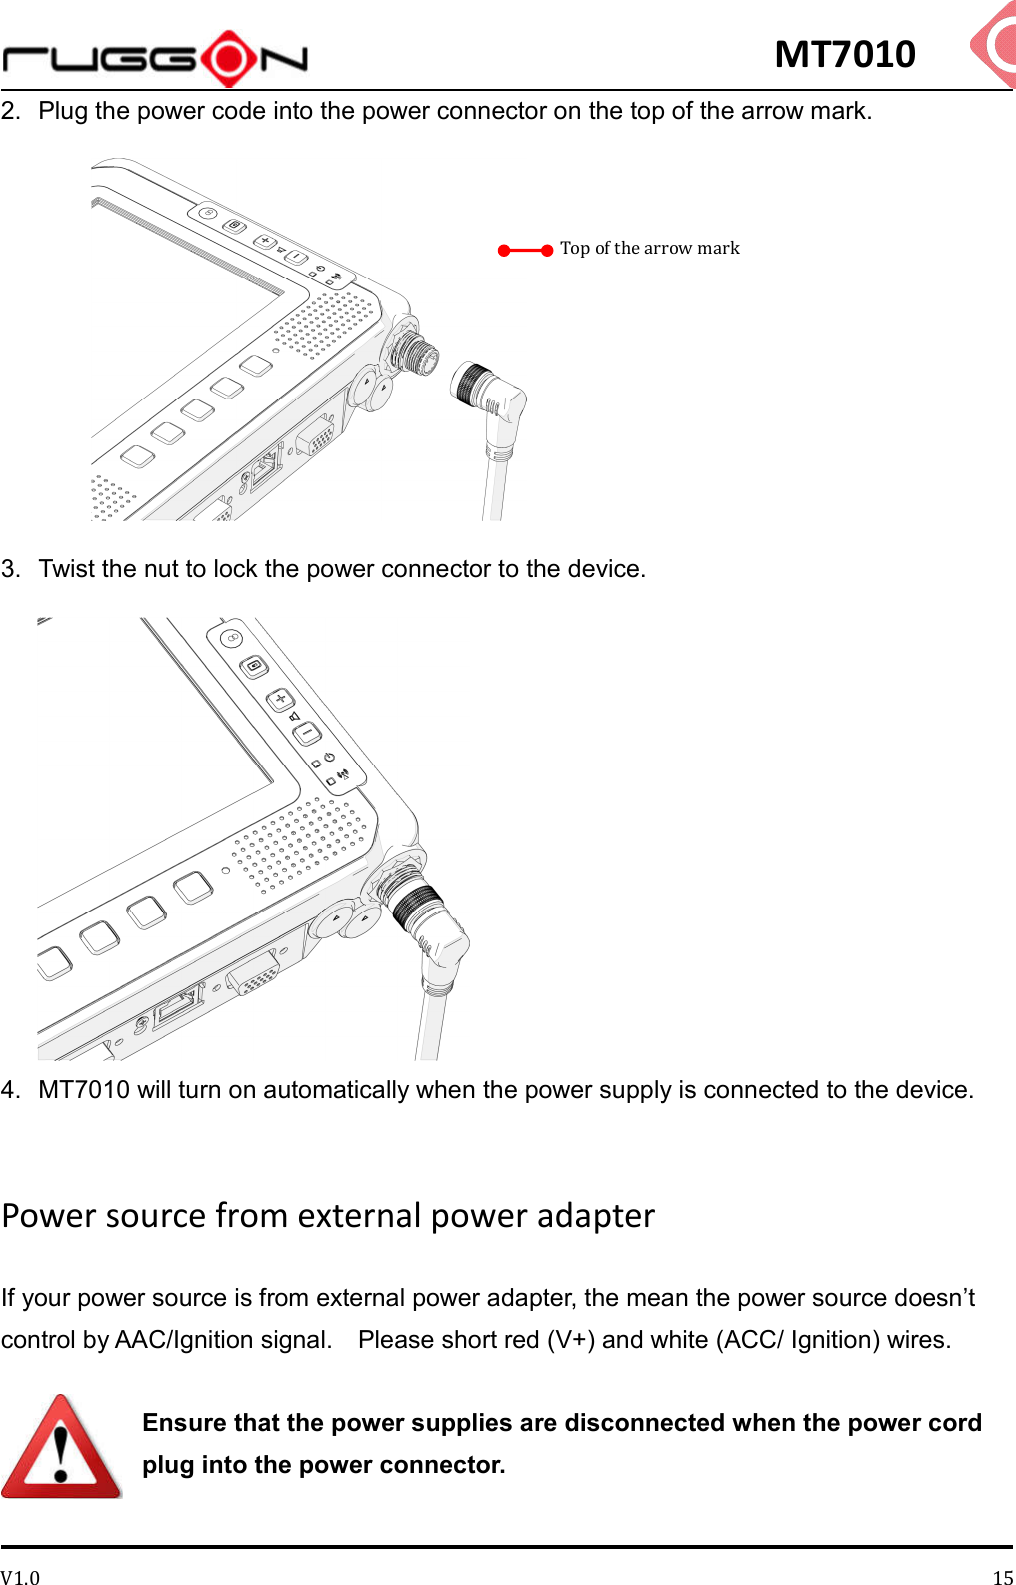 MT7010 V1.0 152.  Plug the power code into the power connector on the top of the arrow mark.          3.  Twist the nut to lock the power connector to the device.  4.  MT7010 will turn on automatically when the power supply is connected to the device.  Power source from external power adapter If your power source is from external power adapter, the mean the power source doesn’t control by AAC/Ignition signal.    Please short red (V+) and white (ACC/ Ignition) wires.  Ensure that the power supplies are disconnected when the power cord plug into the power connector.  Top of the arrow mark 